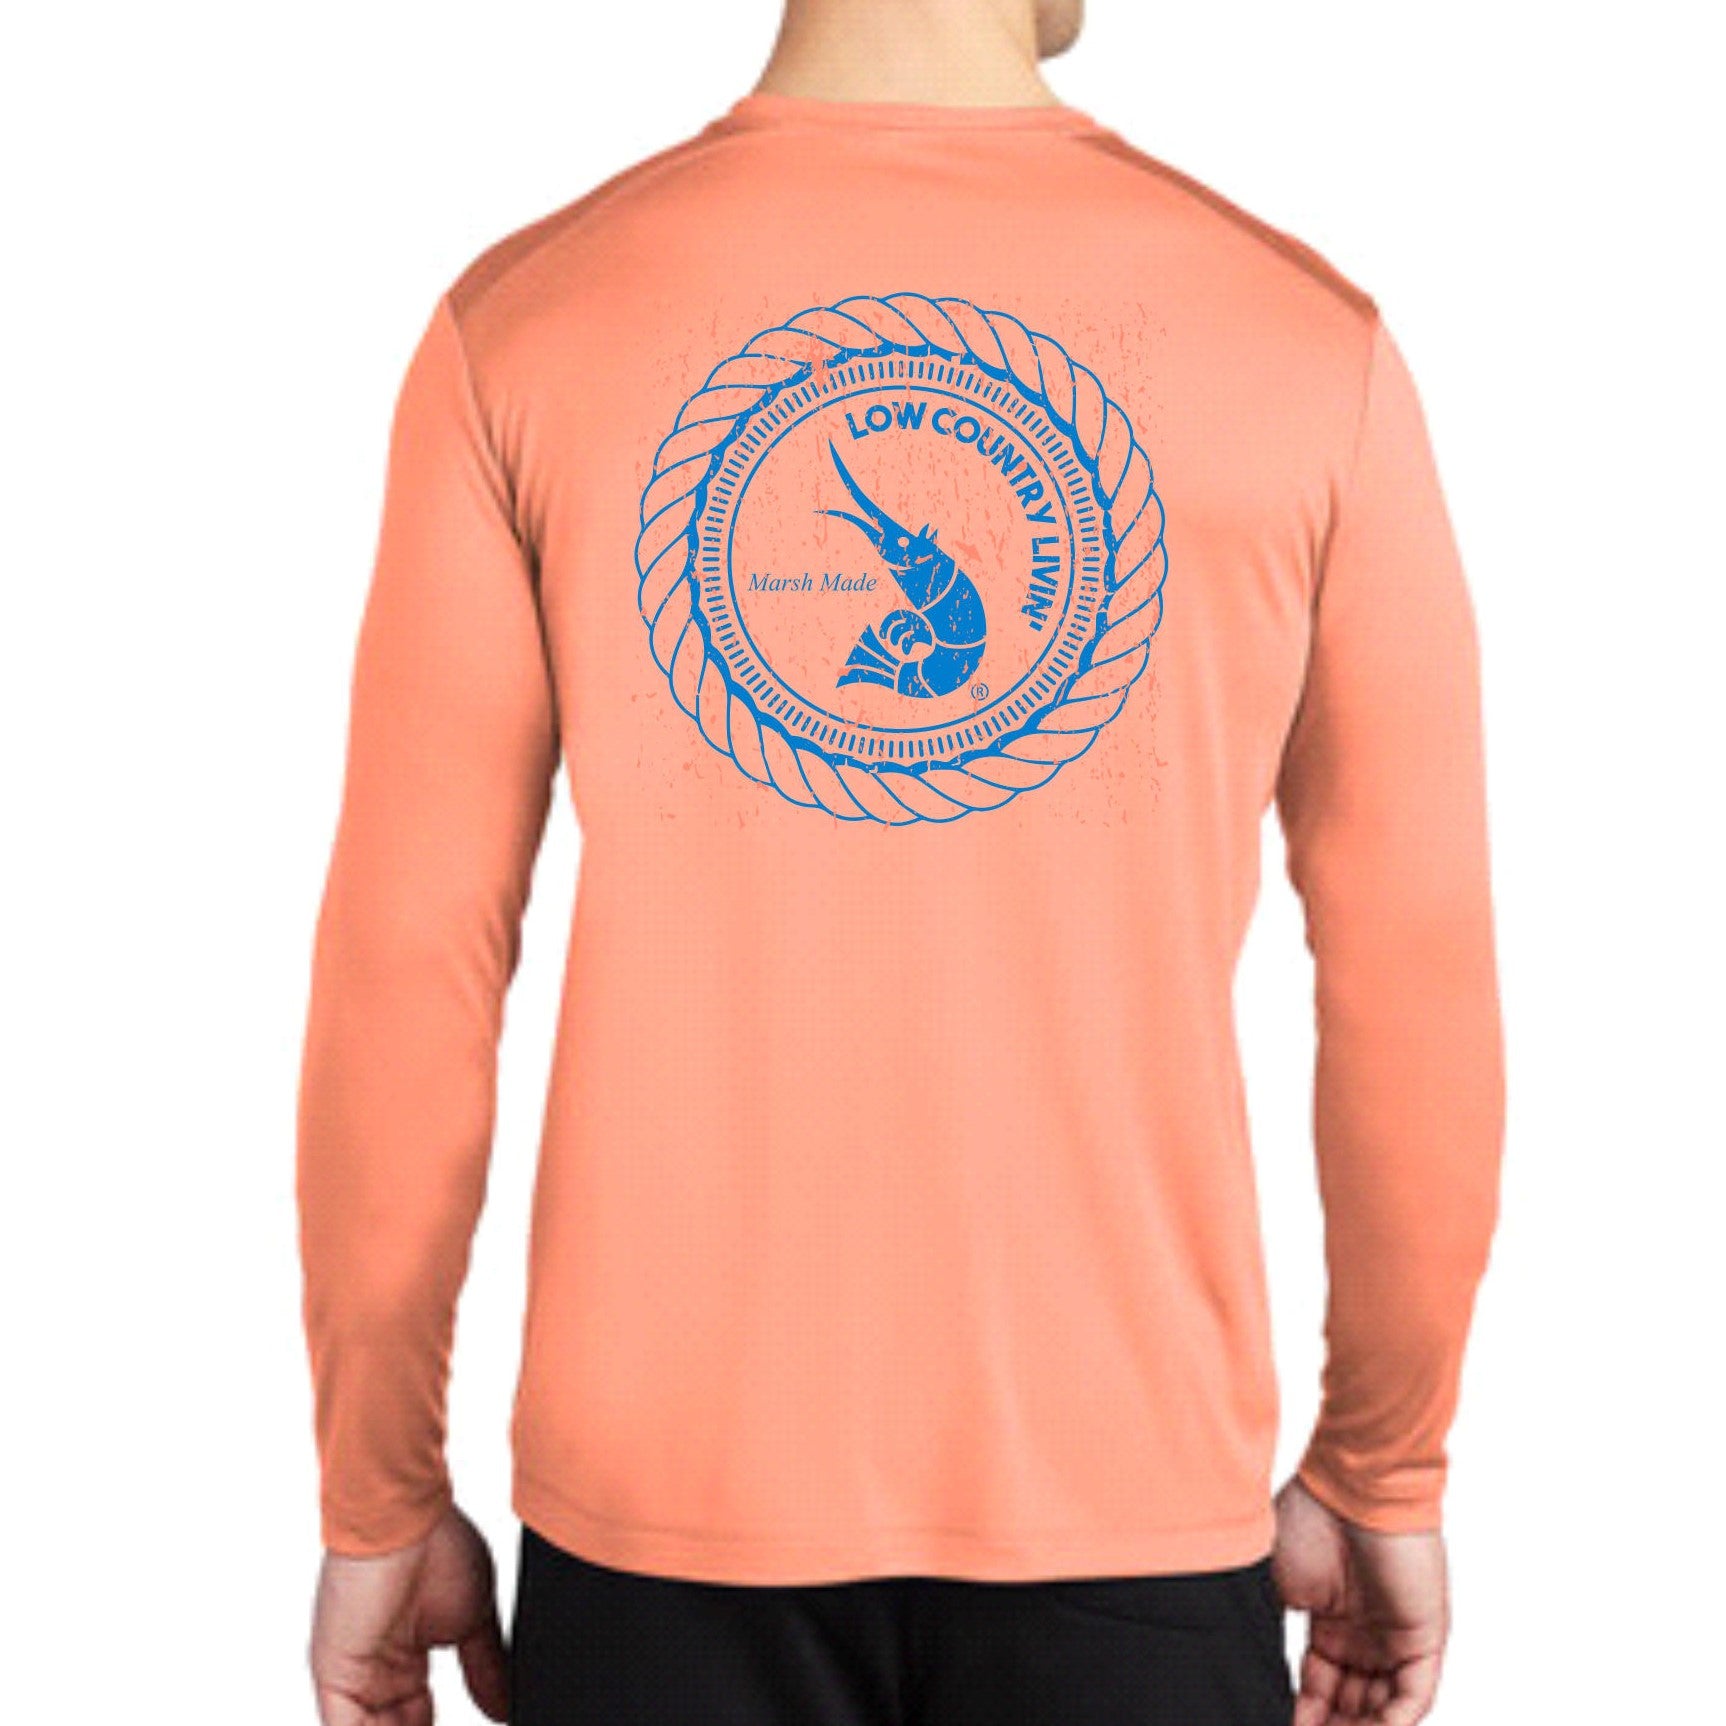 Fishing Shirt Roped LowCo L/S SPF 50 – Low Country Livin'